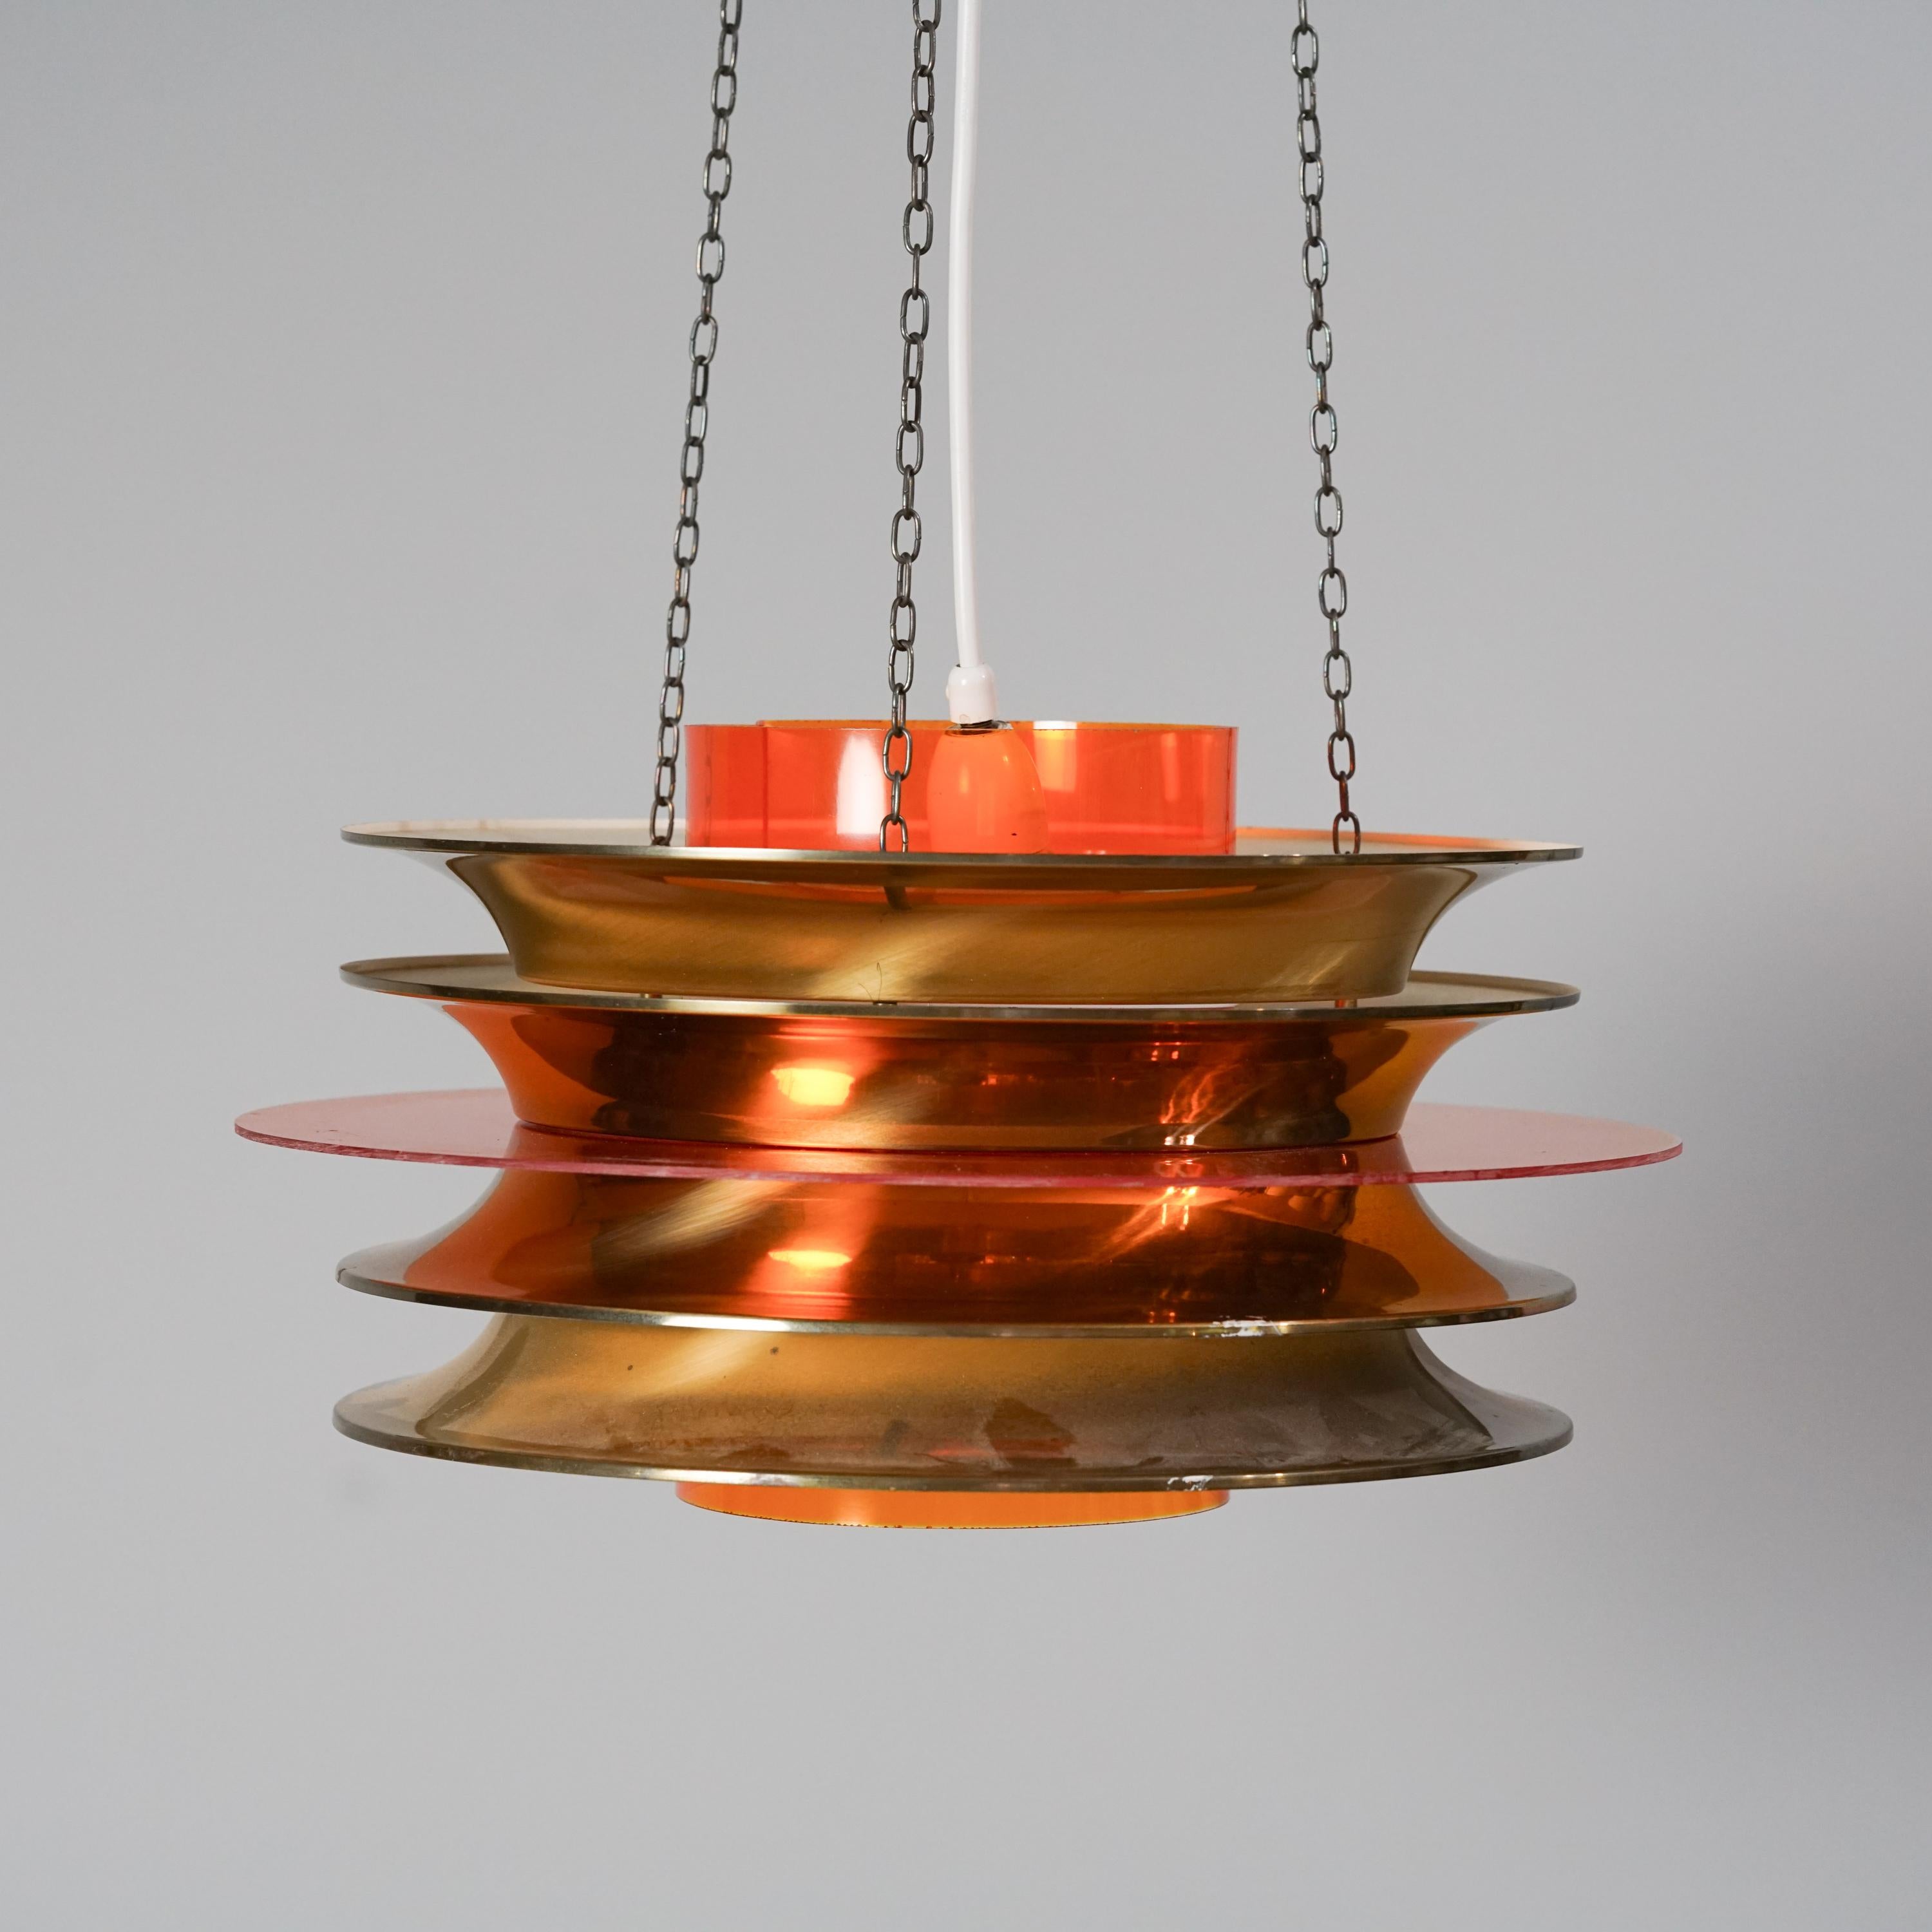 Space Age -style Kai Ruokonen pendant manufactured by Lynx, 1970s. Brass and acrylic. Good vintage condition, minor patina consistent with age and use. Playful design, suitable for high ceiling space. 